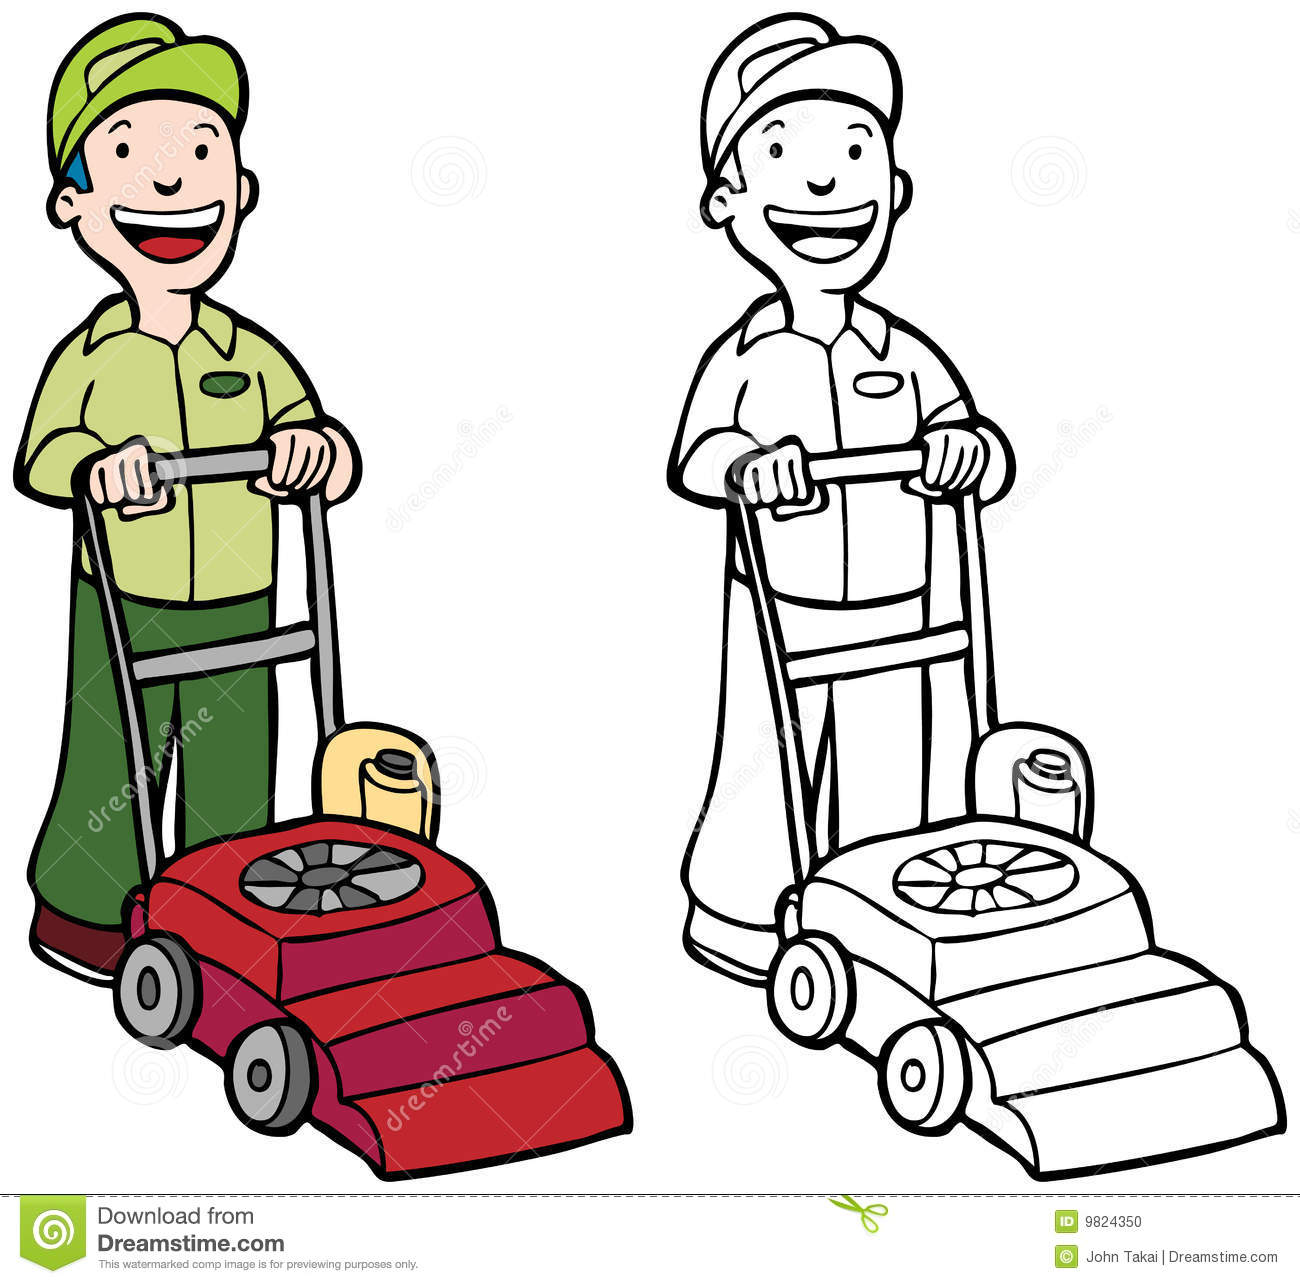 Cartoon Image Of Man Mowing Lawn   Color And Black White Versions